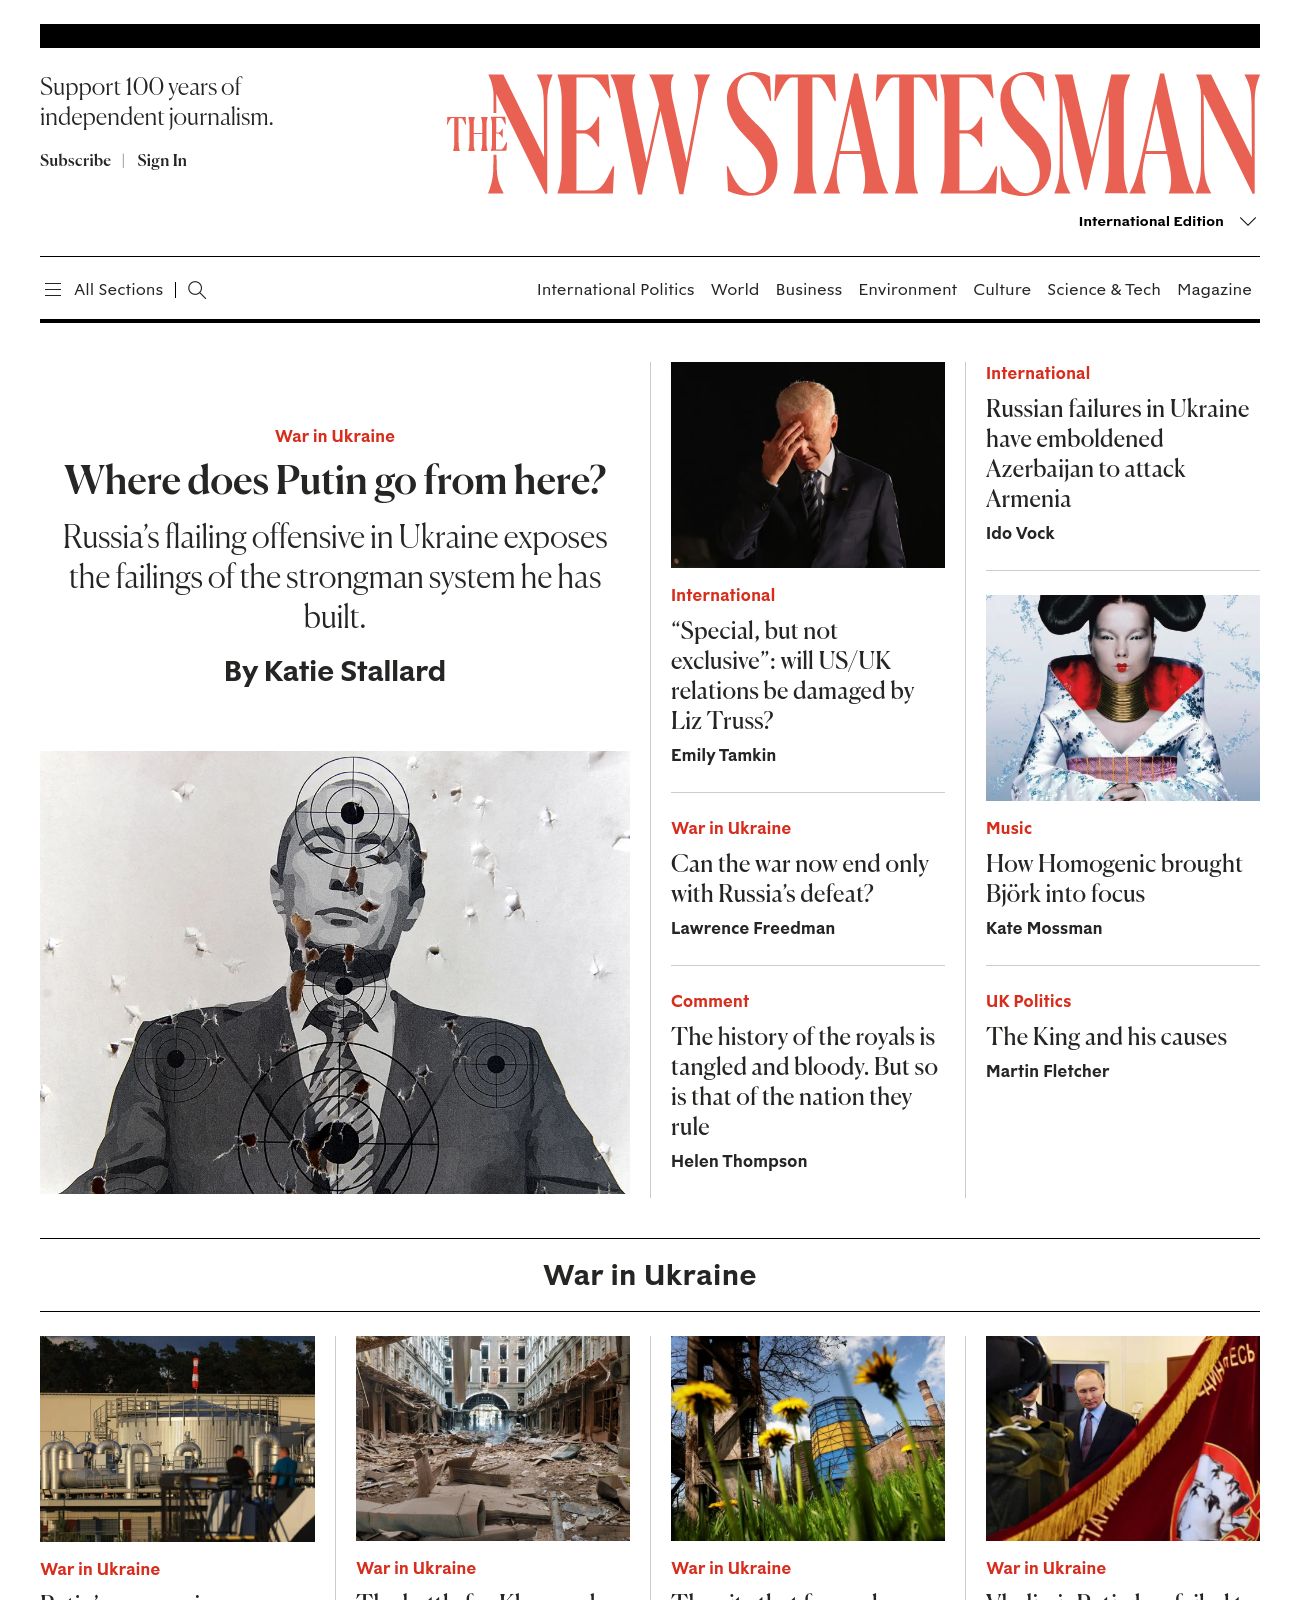 New Statesman at 2022-09-17 02:13:21+01:00 local time